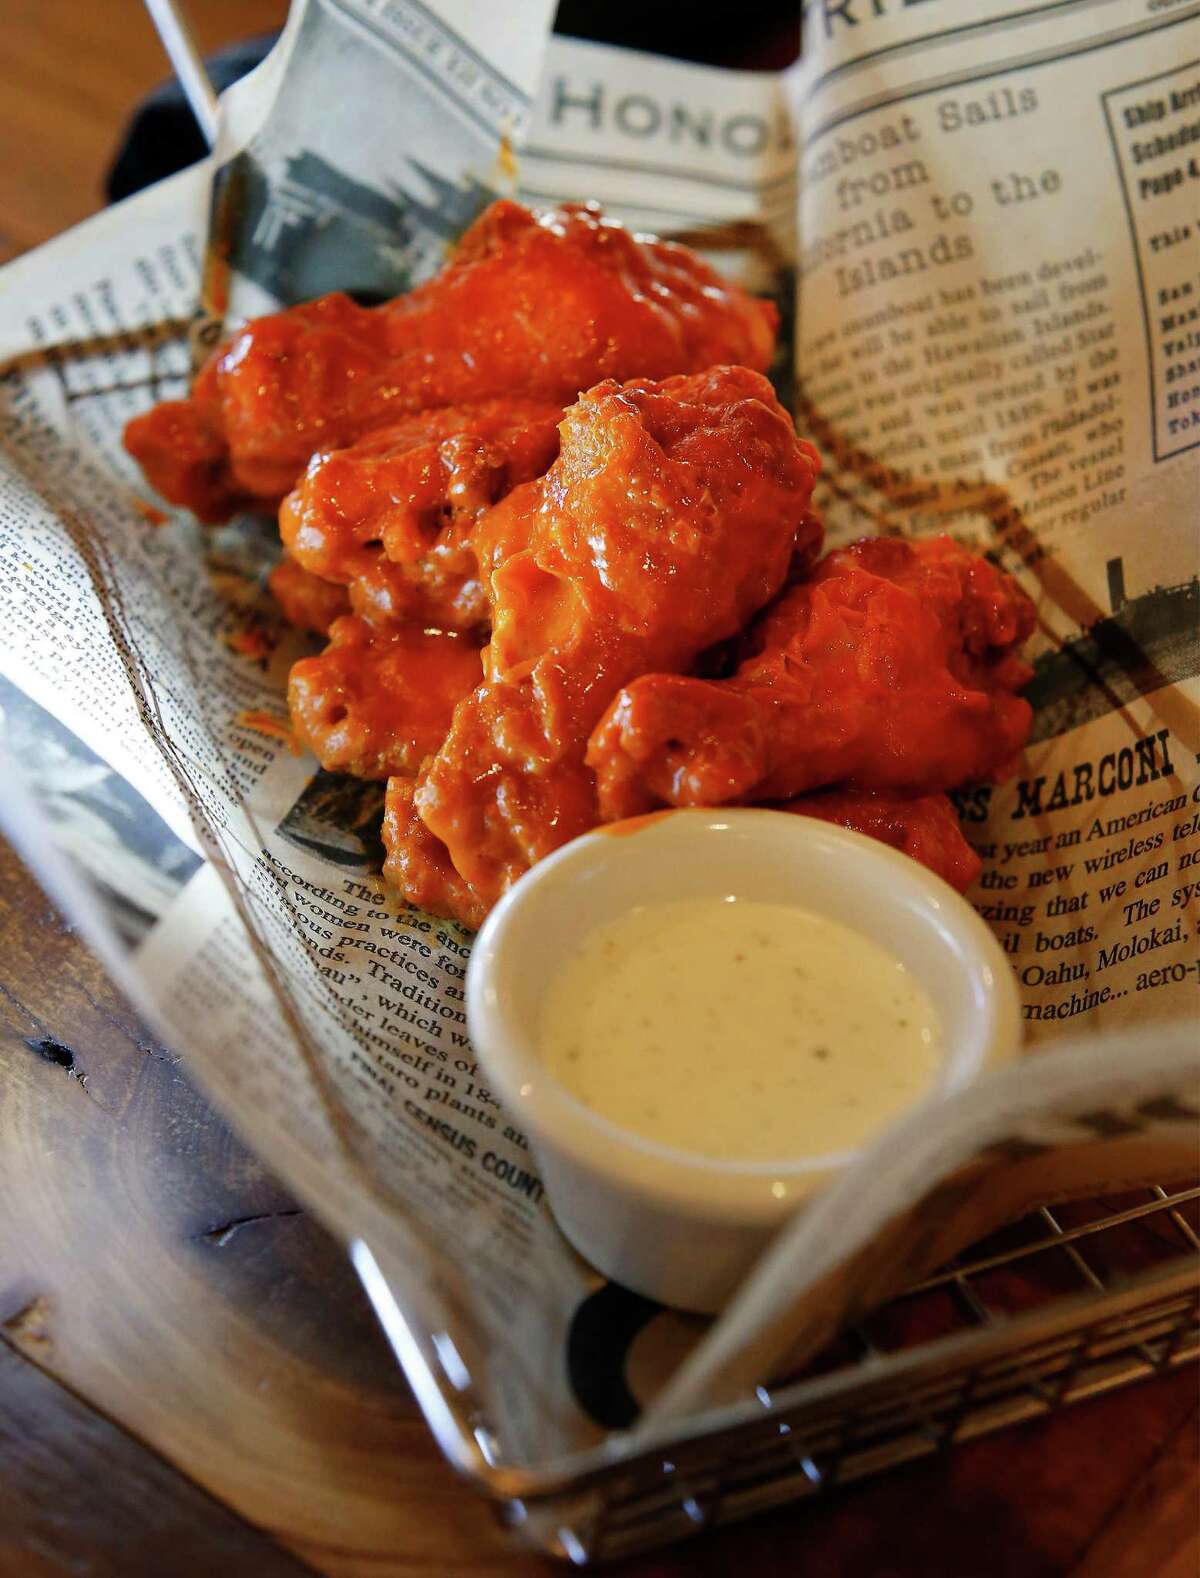 Wings are offered with a choice of sauces. Avoid the too-sweet moonshine barbecue sauce and go for the hot wing sauce.